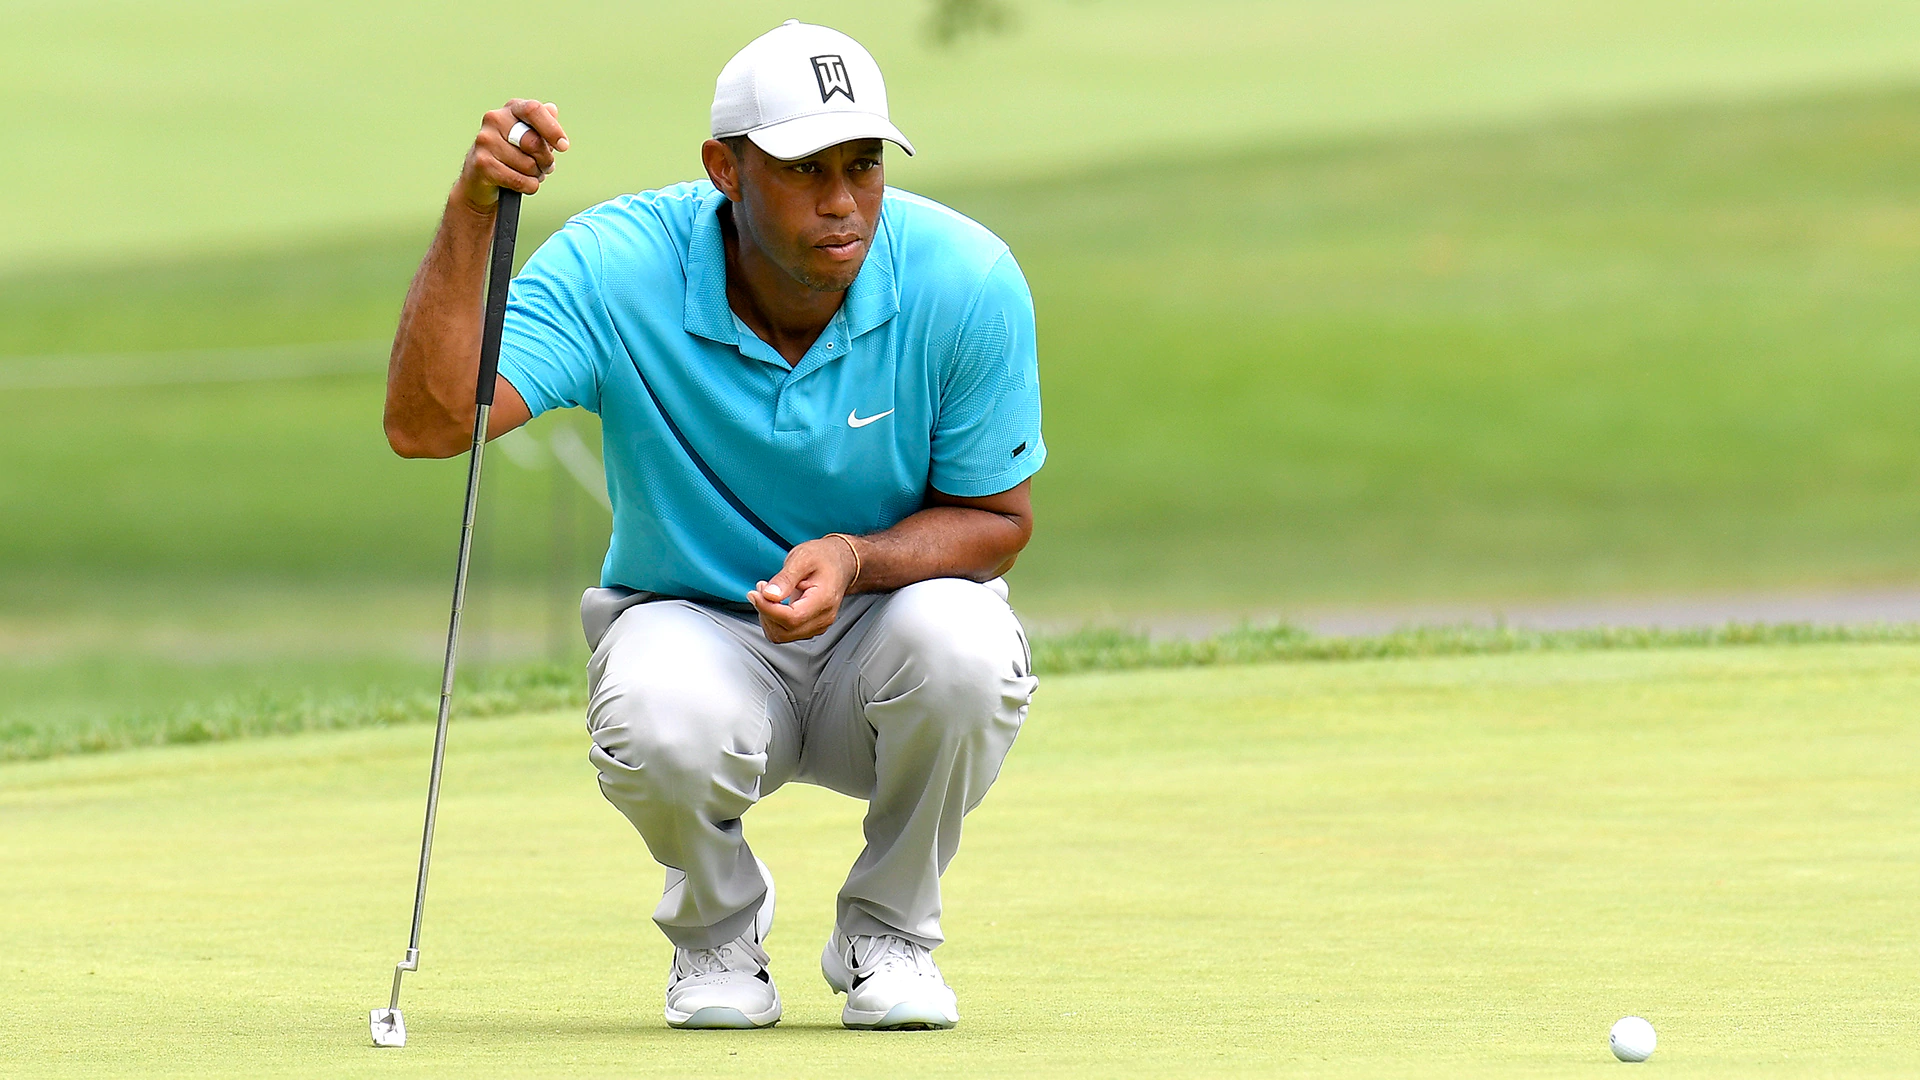 Unlike others, Tiger Woods still focused without fans: ‘I’m pretty intense when I play’